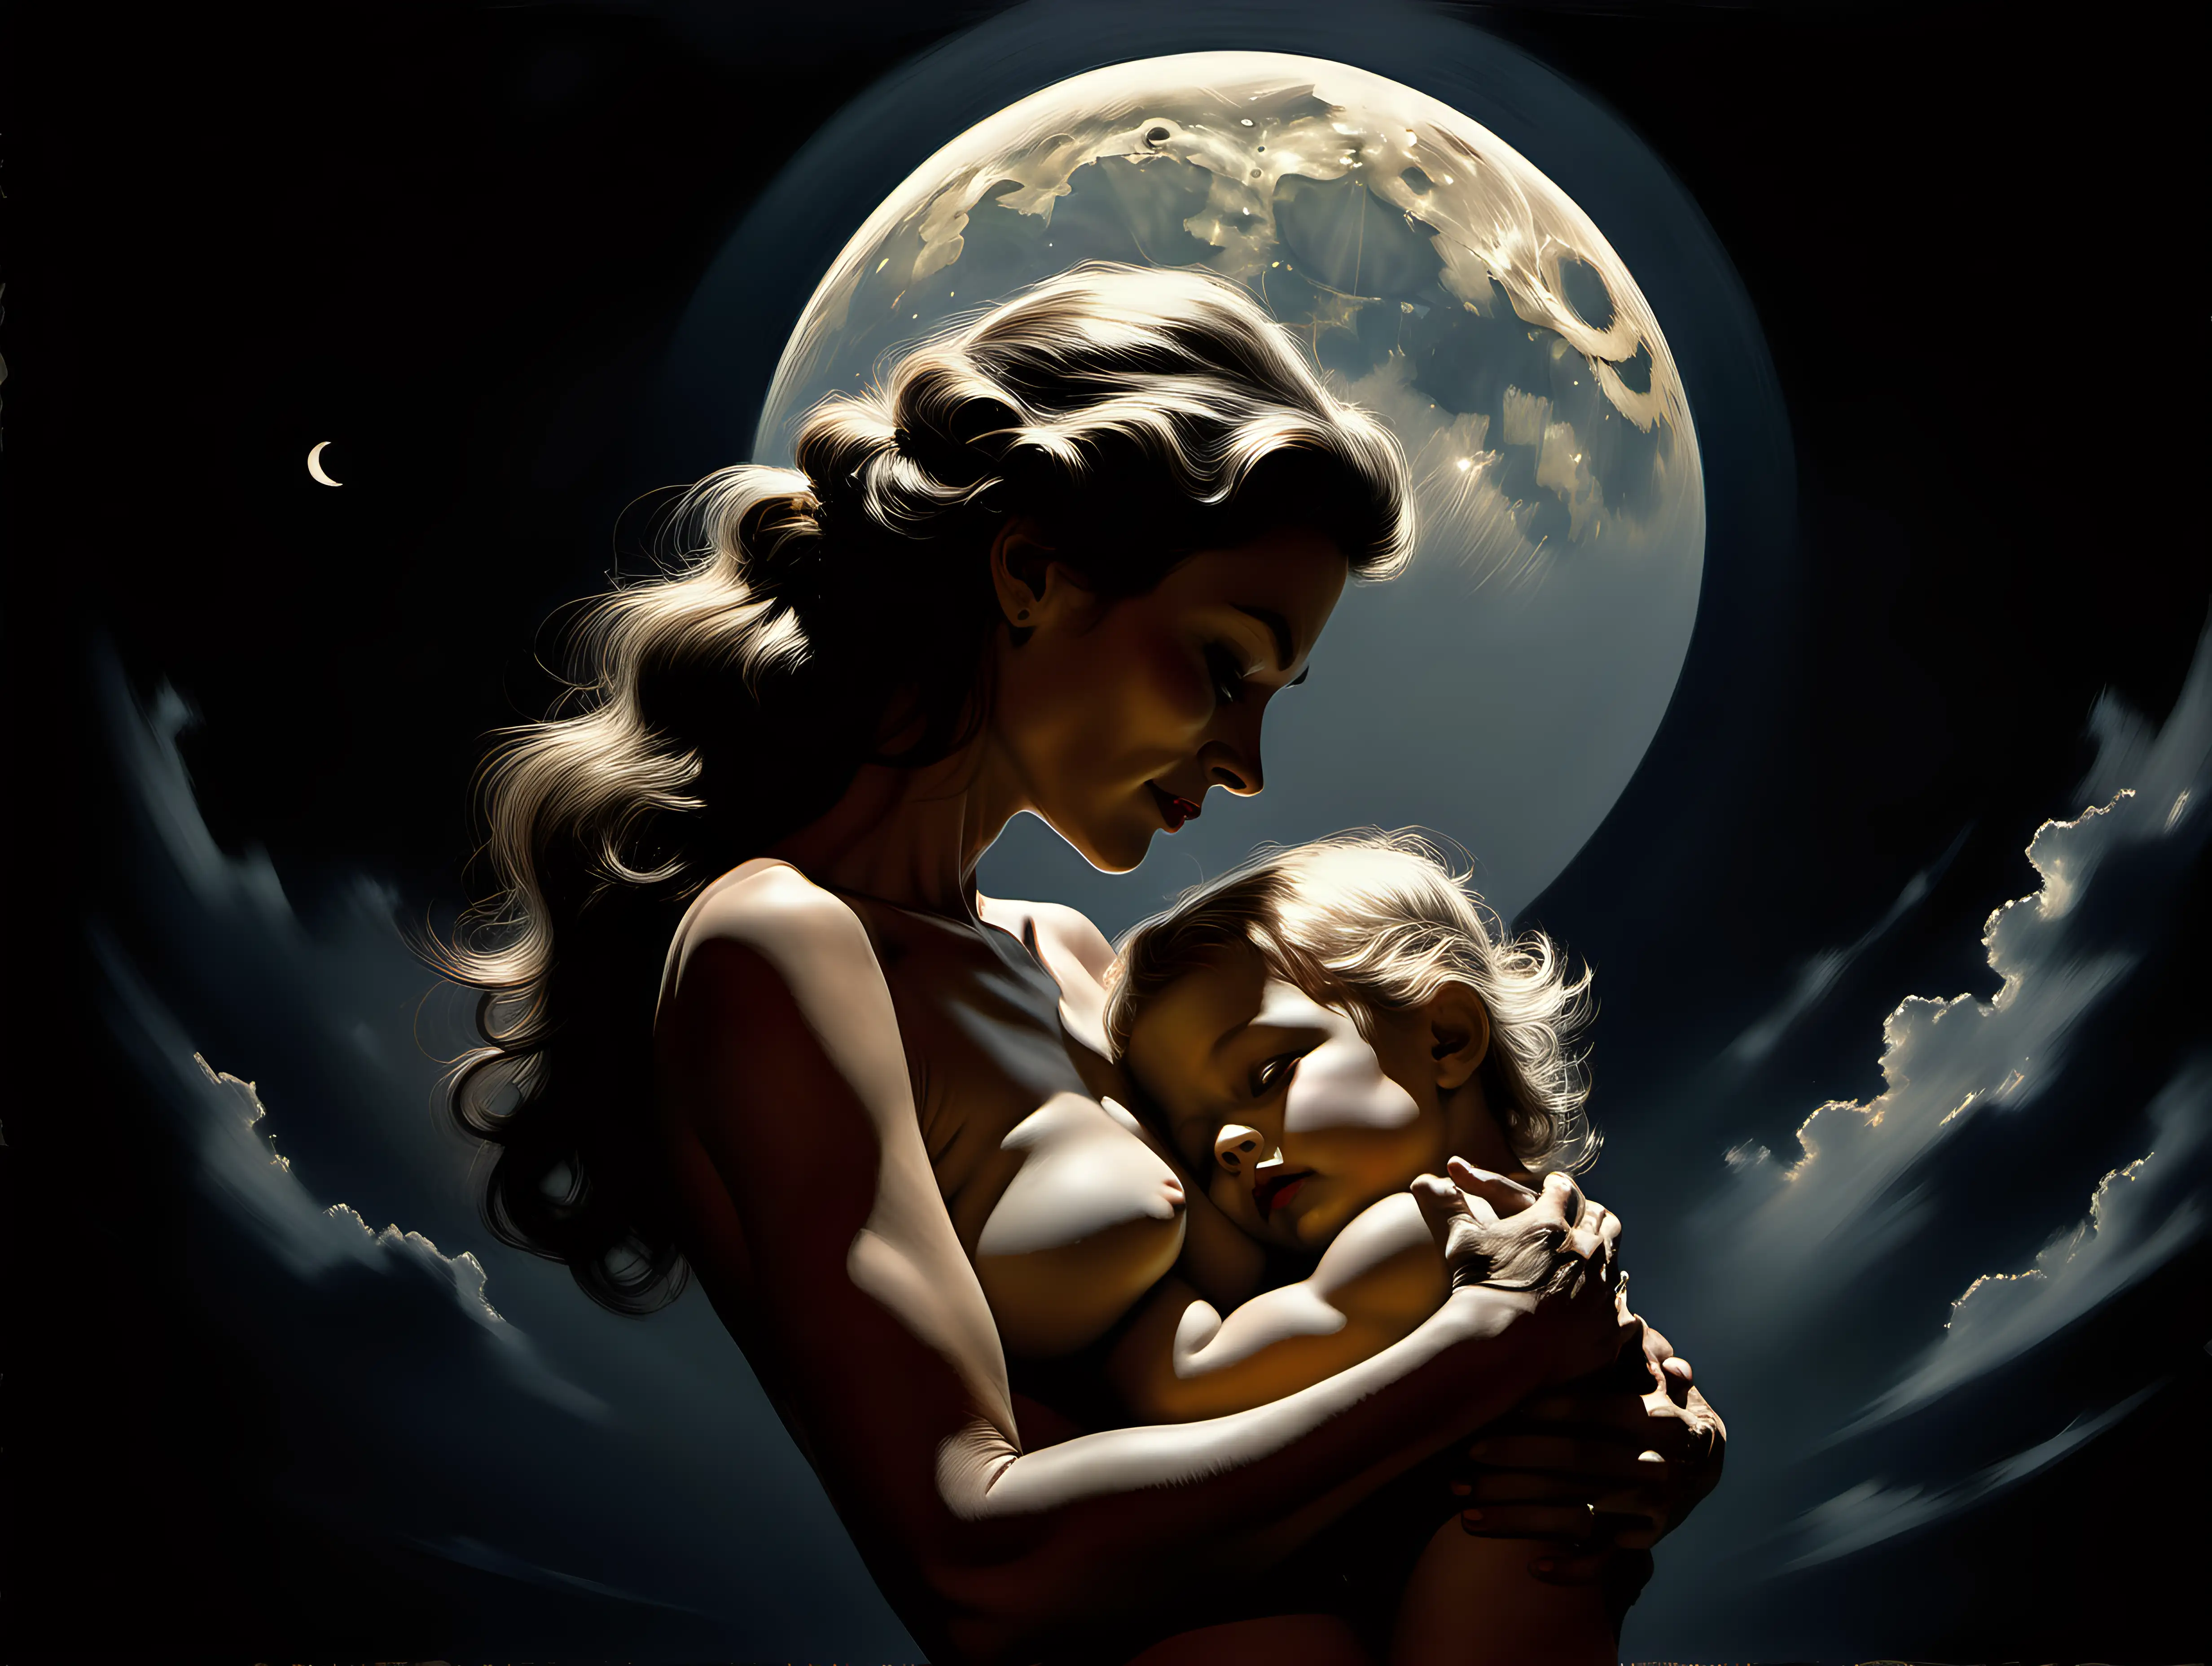 Embracing Love Under the Moonlight Photorealistic Mother and Child Portrait by Frank Frazetta